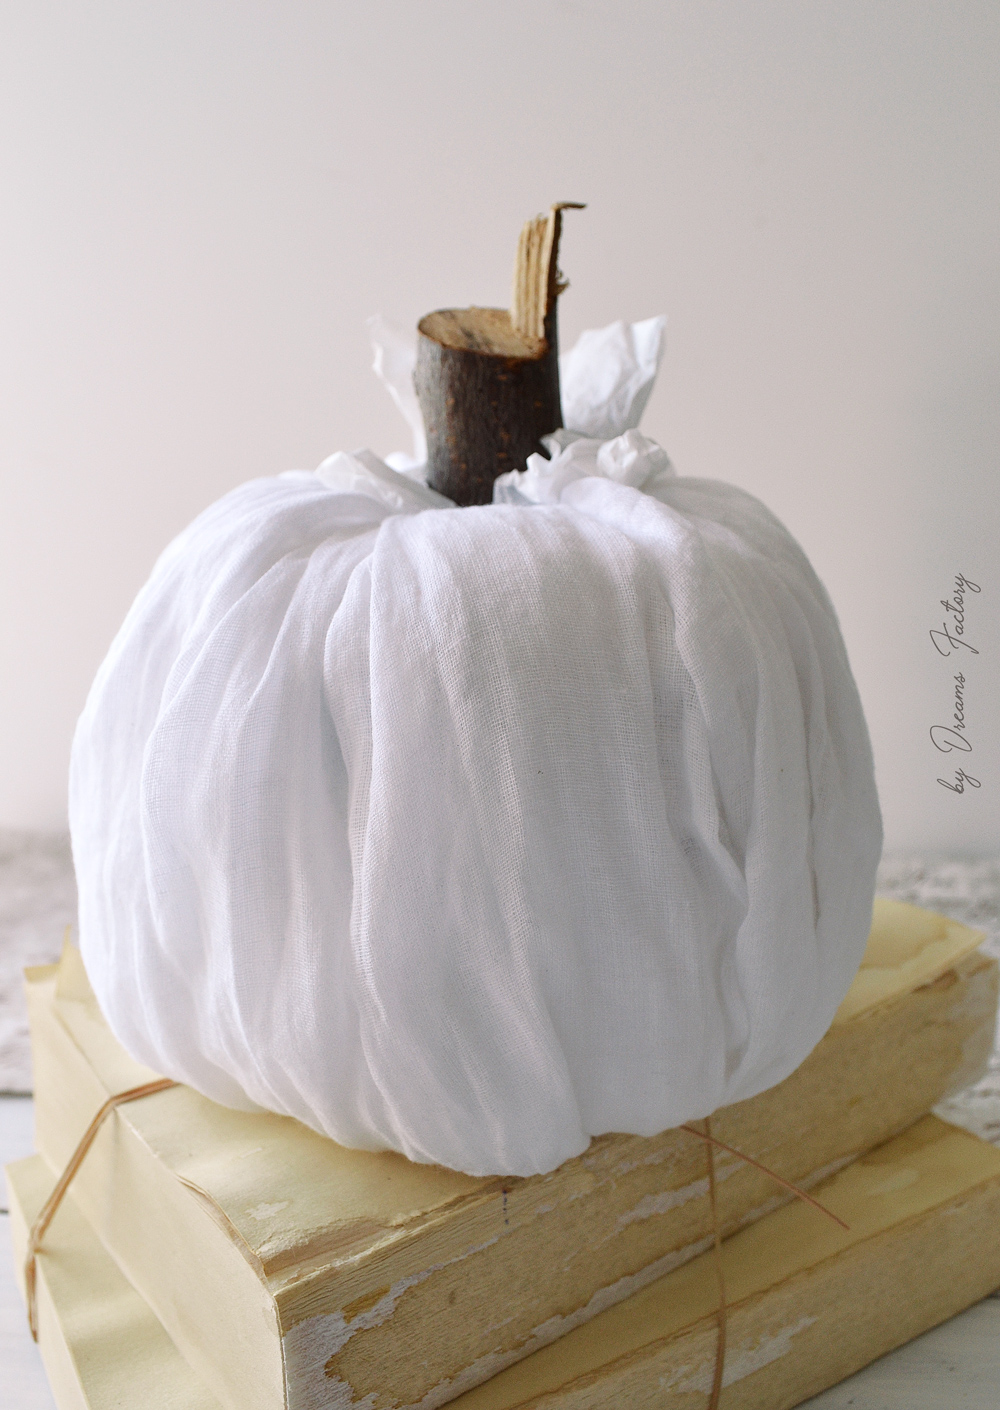 Make these stunning DIY no-sew fabric pumpkins in just 5 minutes and use them all over your home for beautiful fall decorating - by Dreams Factory